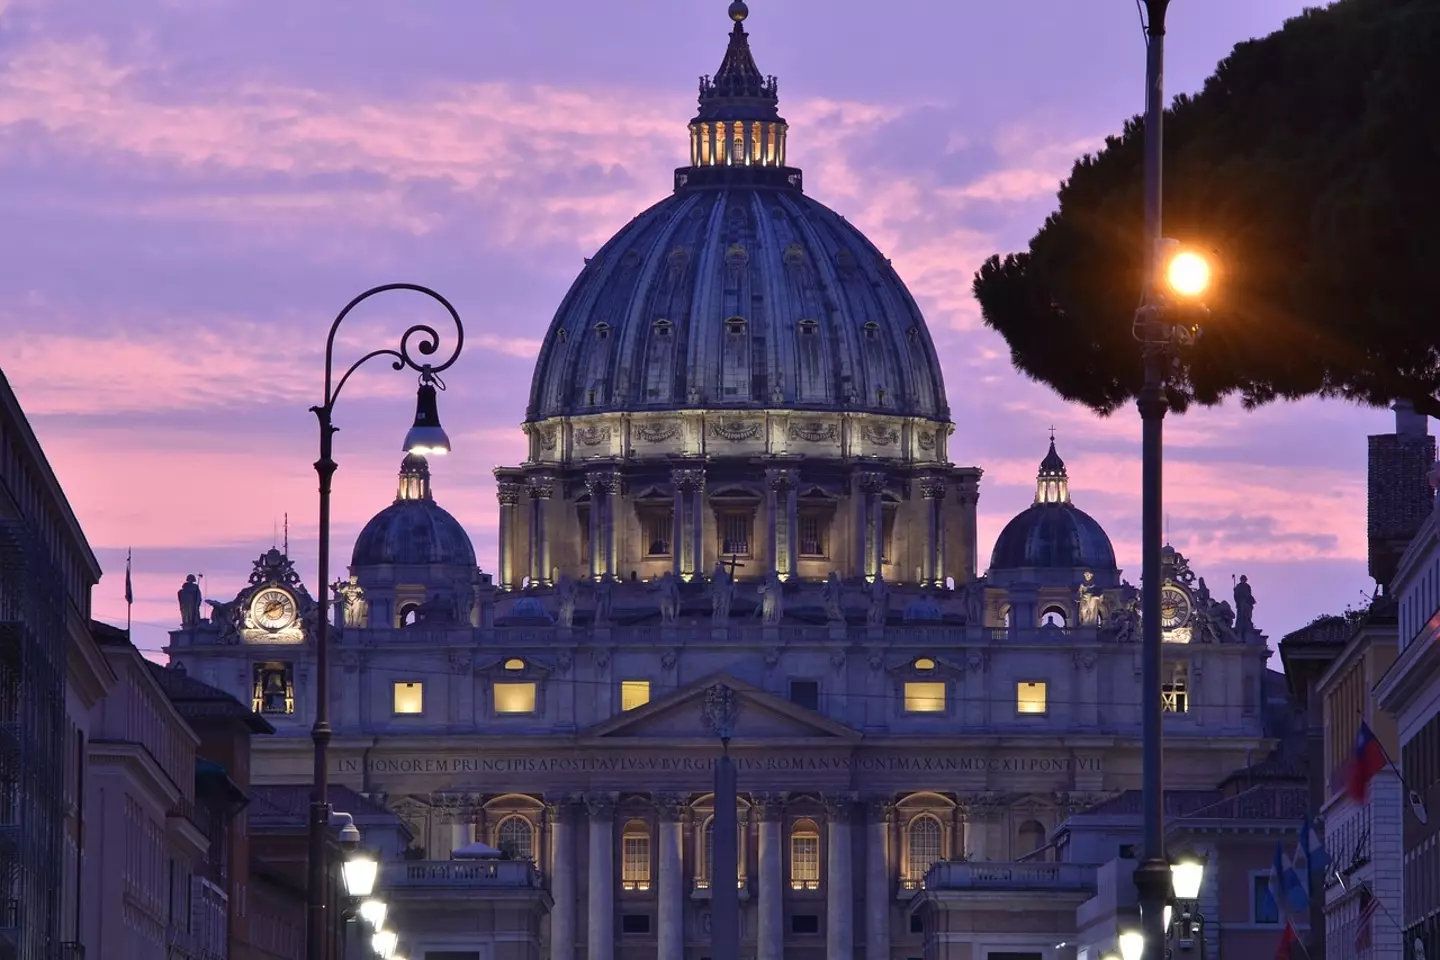 The Catholic Church has been hit by another wave of sexual abuse claims.